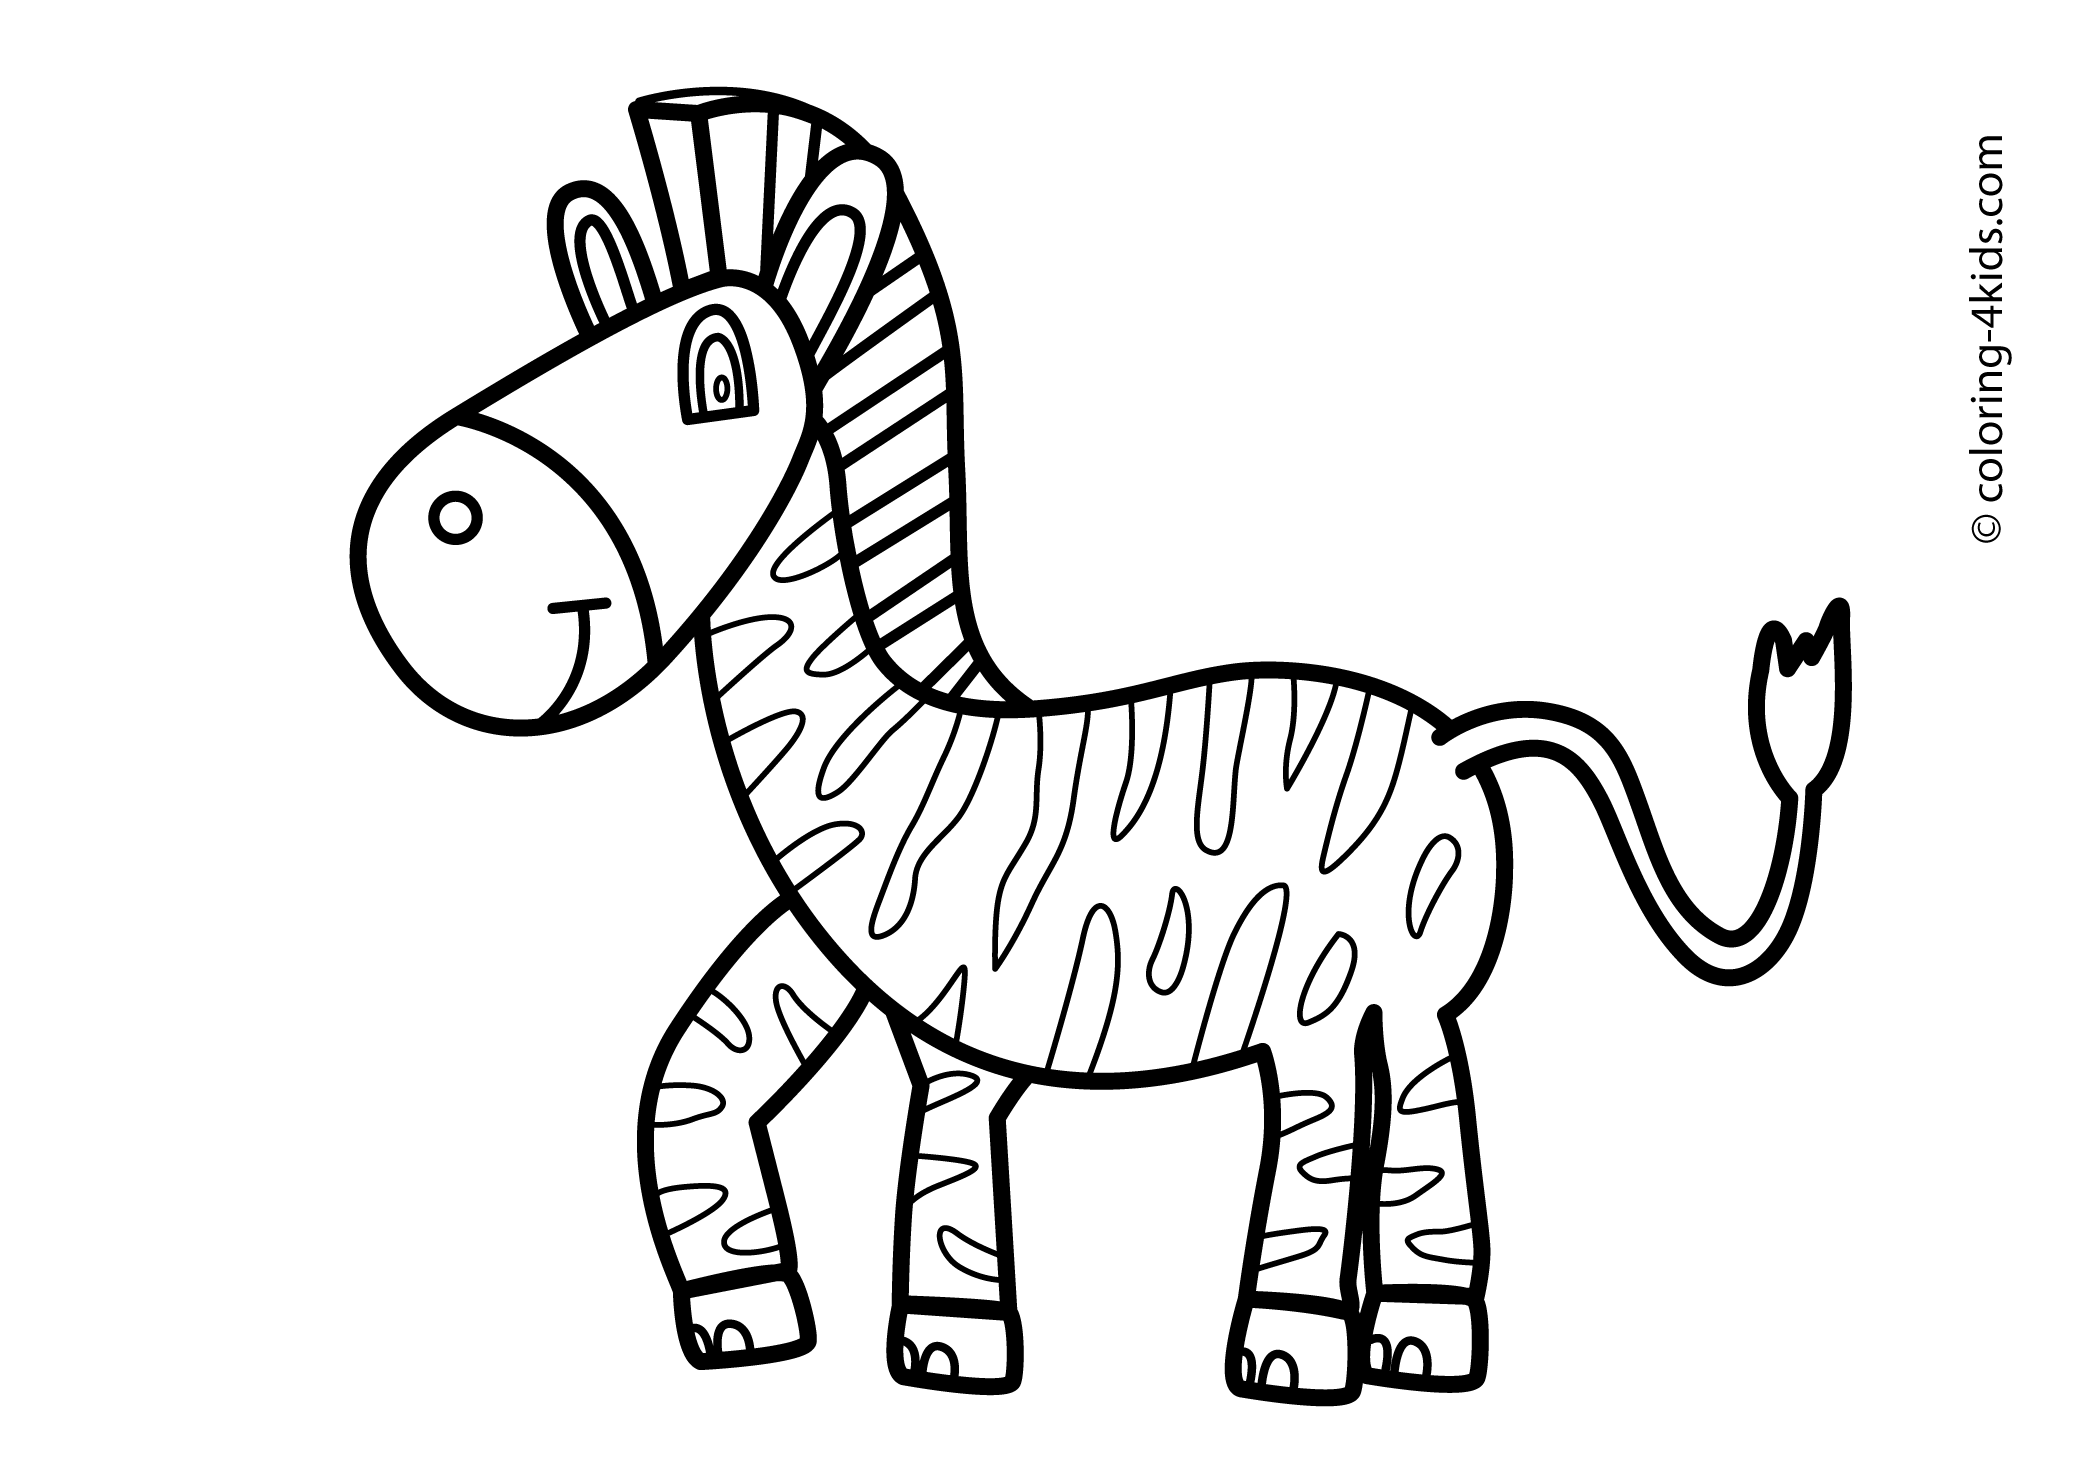 zebra coloring book zebras coloring pages free coloring pages zebra coloring book zebra 